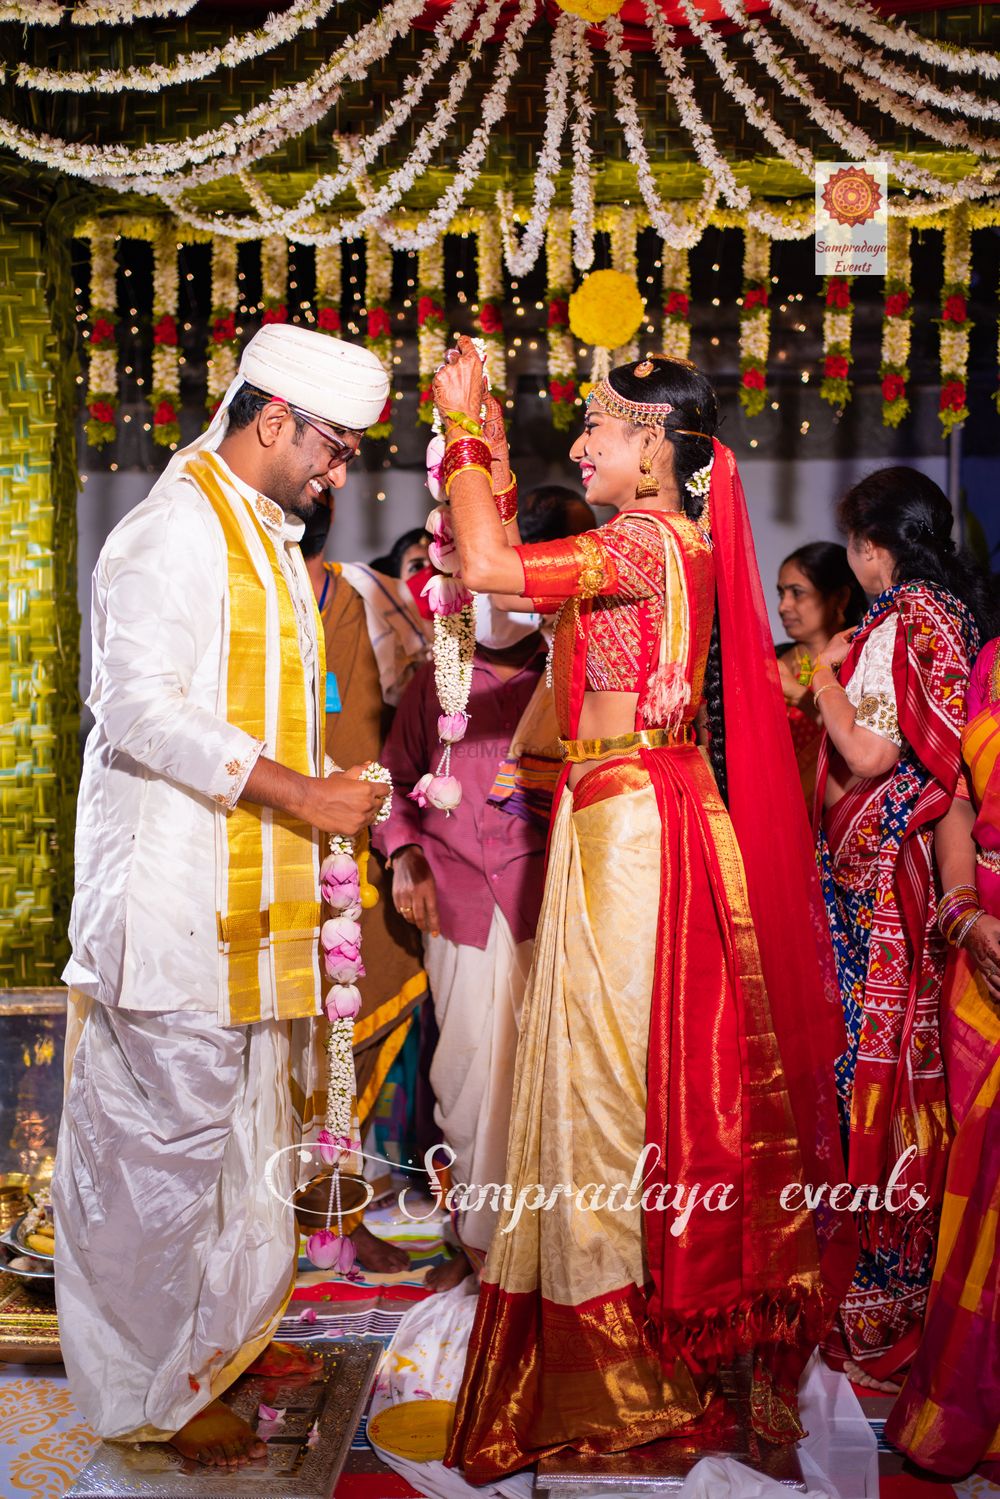 Photo From Charan and Kohili - By Sampradaya Events and Wedding Planners